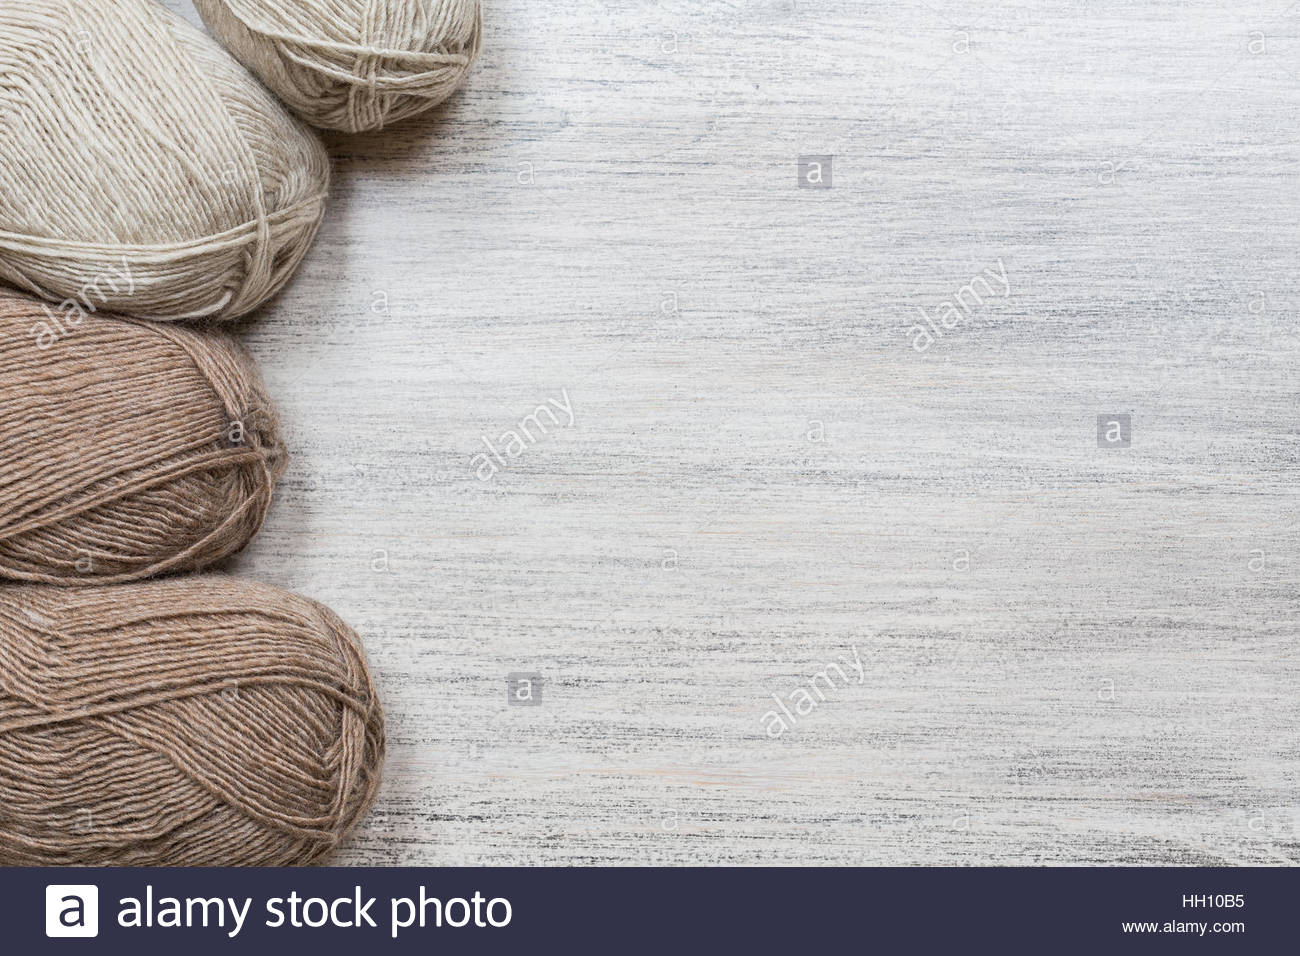 Yarn Skeins On Wooden Background Business Card Stock Photo